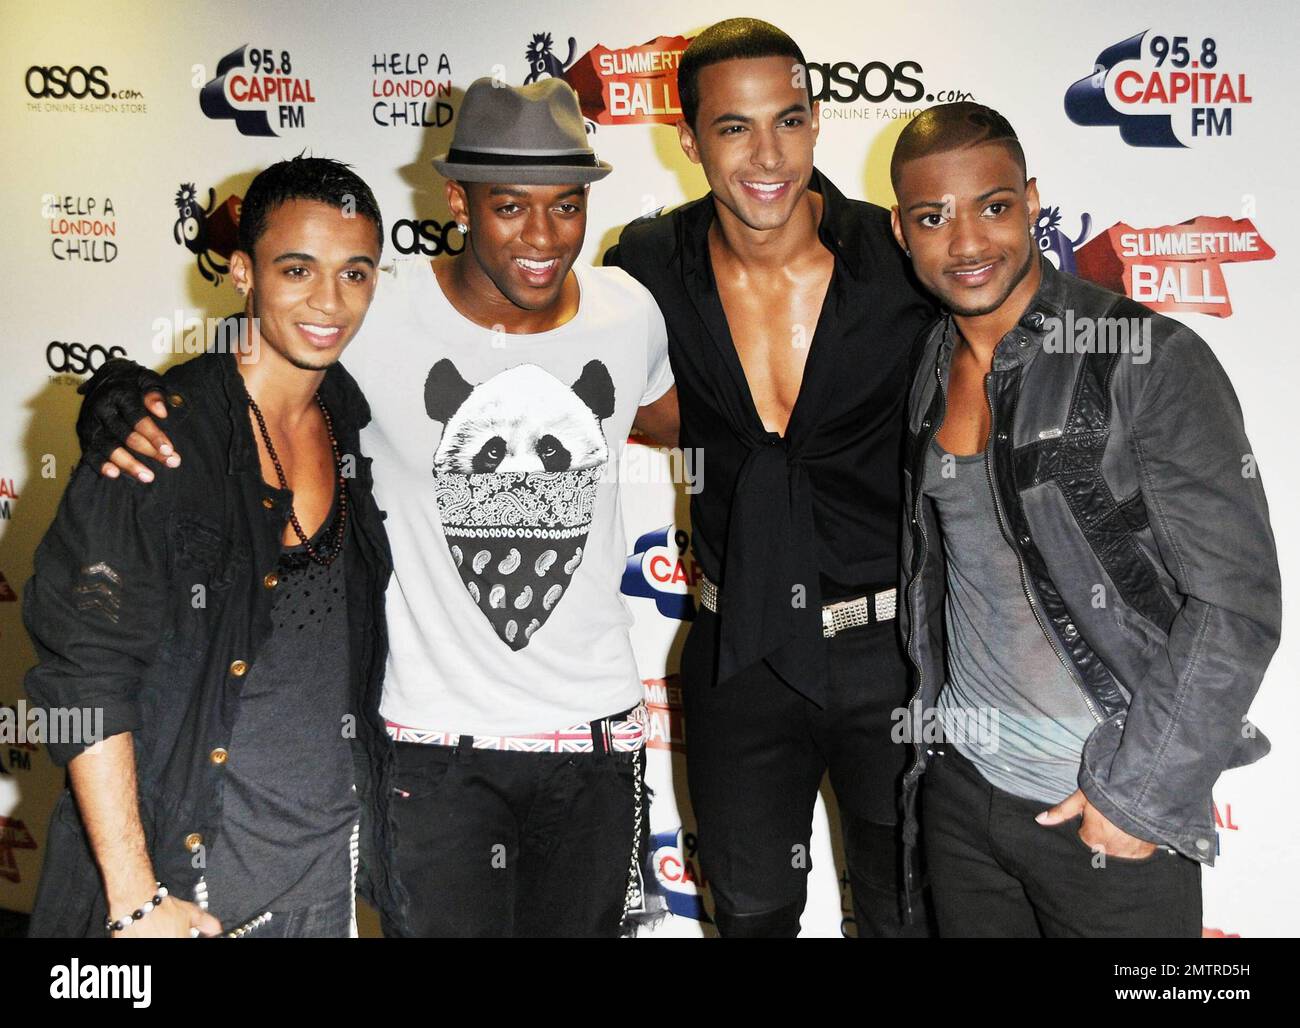 Aston Merrygold, Marvin Humes, Jonathan 'JB' Gill and Oritse Williams of the British boyband JLS (Jack the Lad Swing) arrive at Summertime Ball 2010, presented by 95.8 Capital FM radio, held at Wembley Stadium.  The 2010 Ball marks the second year 95.8 Capital FM radio has hosted the pop concert of which a portion of ticket sales profit is donated to the 95.8 Capital FM charity 'Help a London Child'.  London, UK. 06/06/10. . Stock Photo